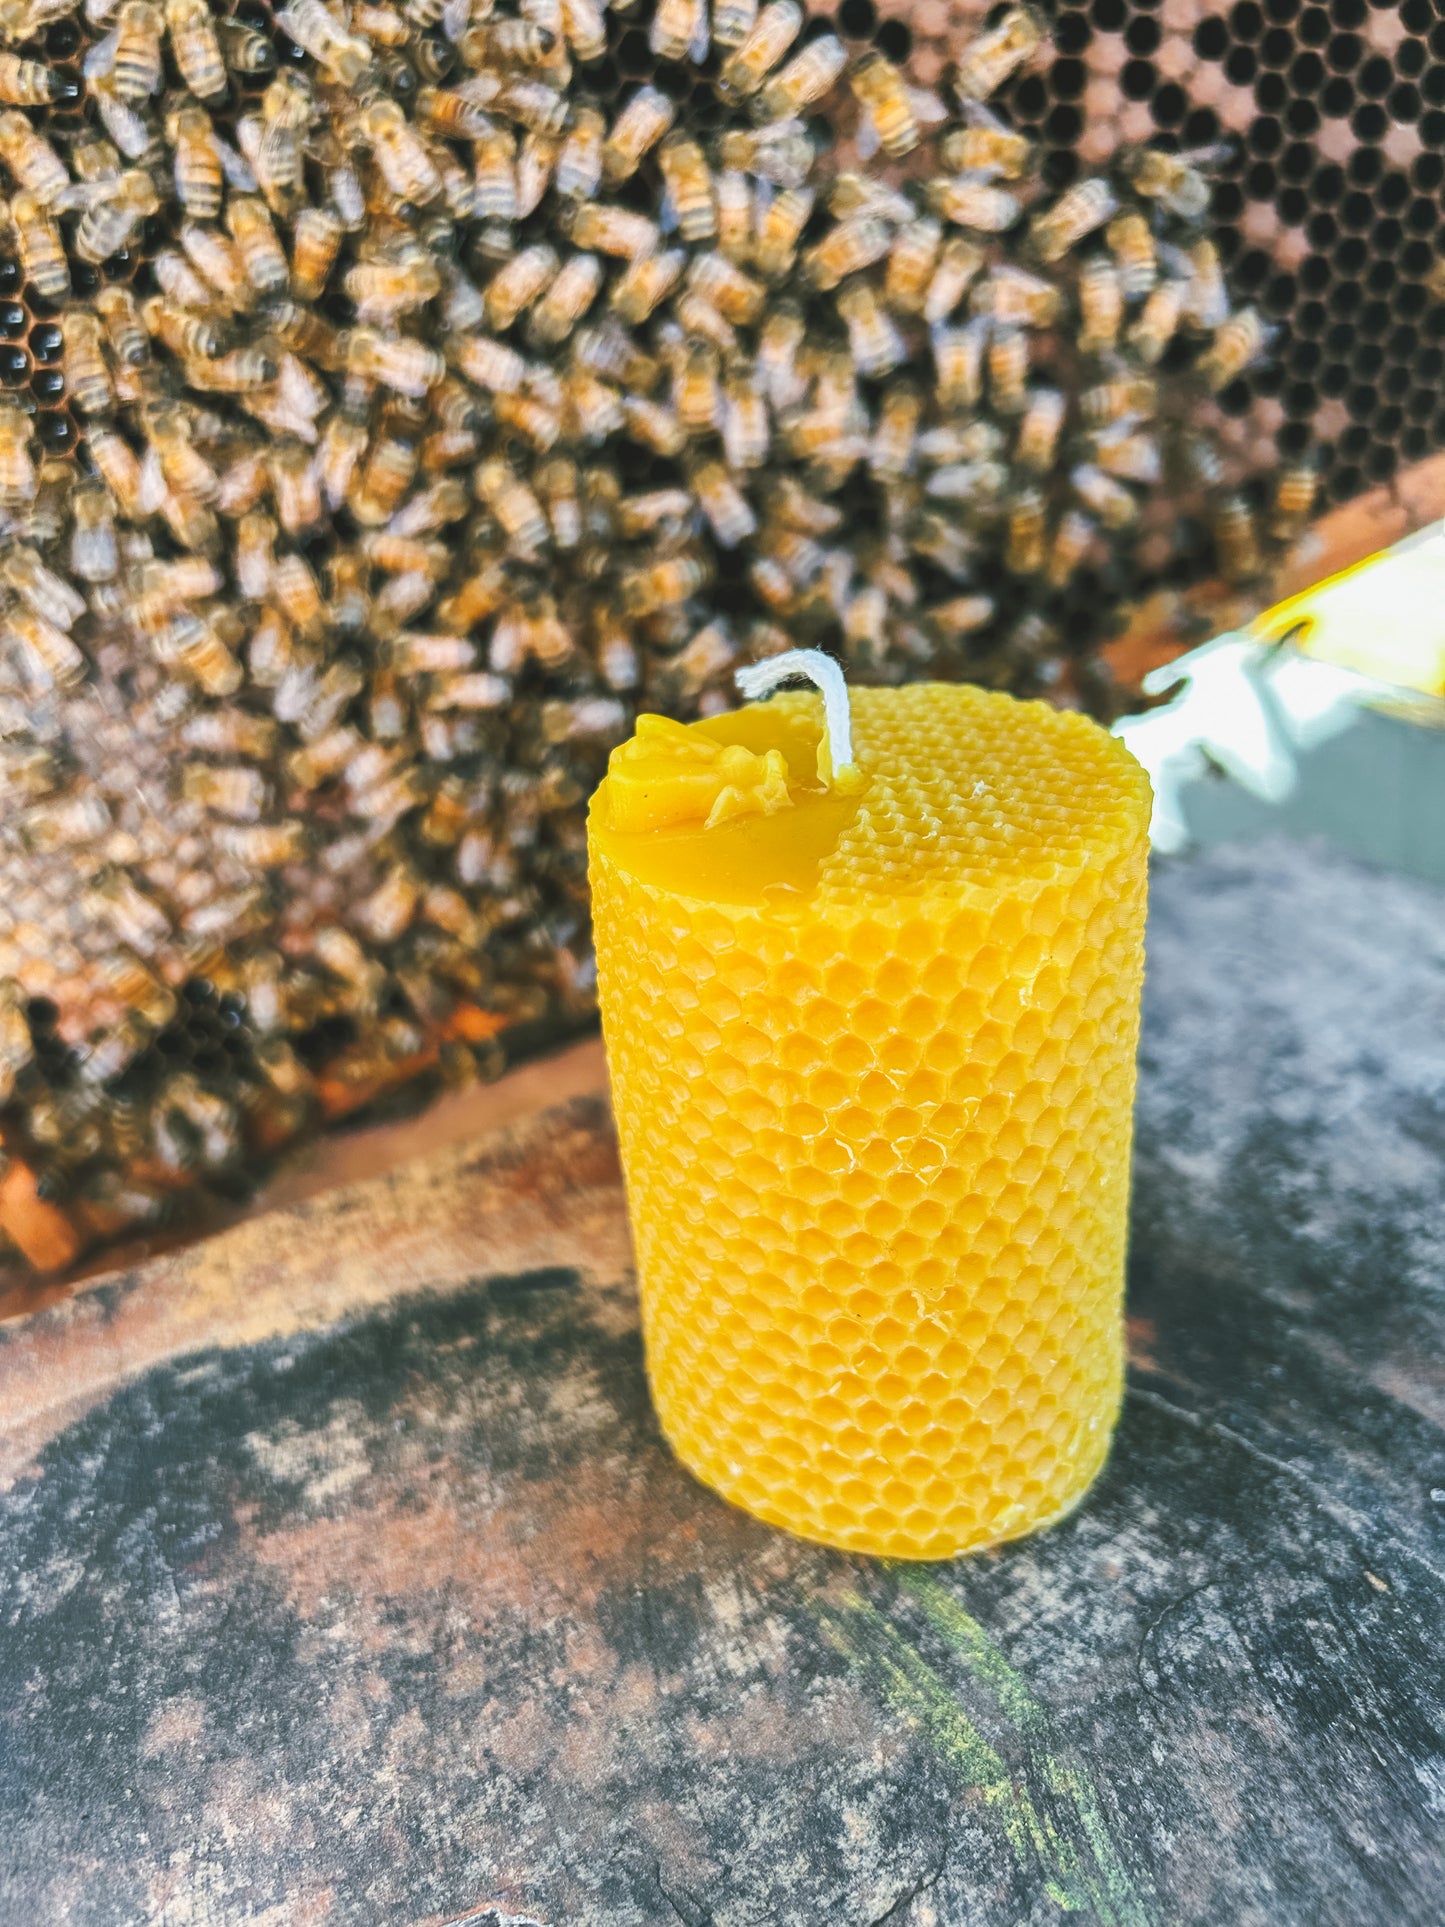 100% Pure Beeswax Pillar Candle